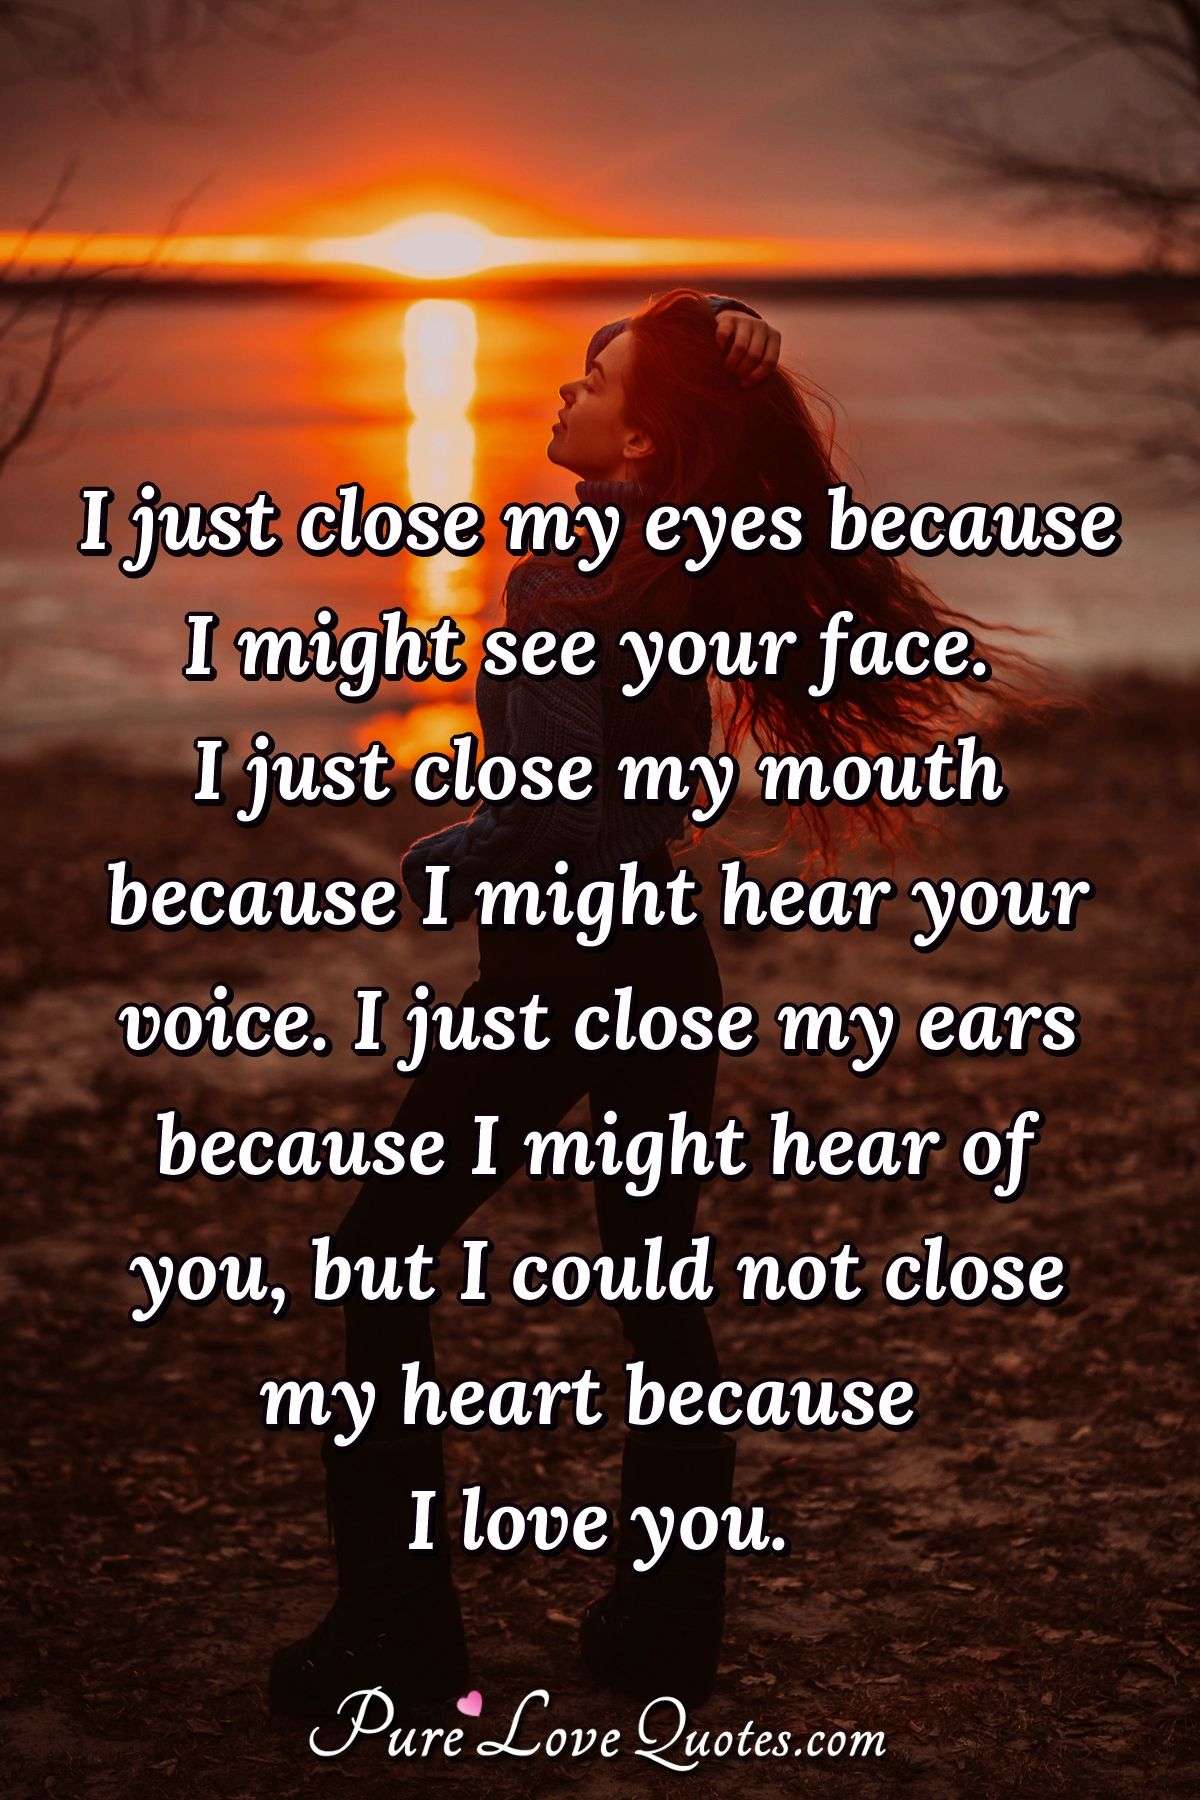 I Just Close My Eyes Because I Might See Your Face I Just Close My Mouth Purelovequotes